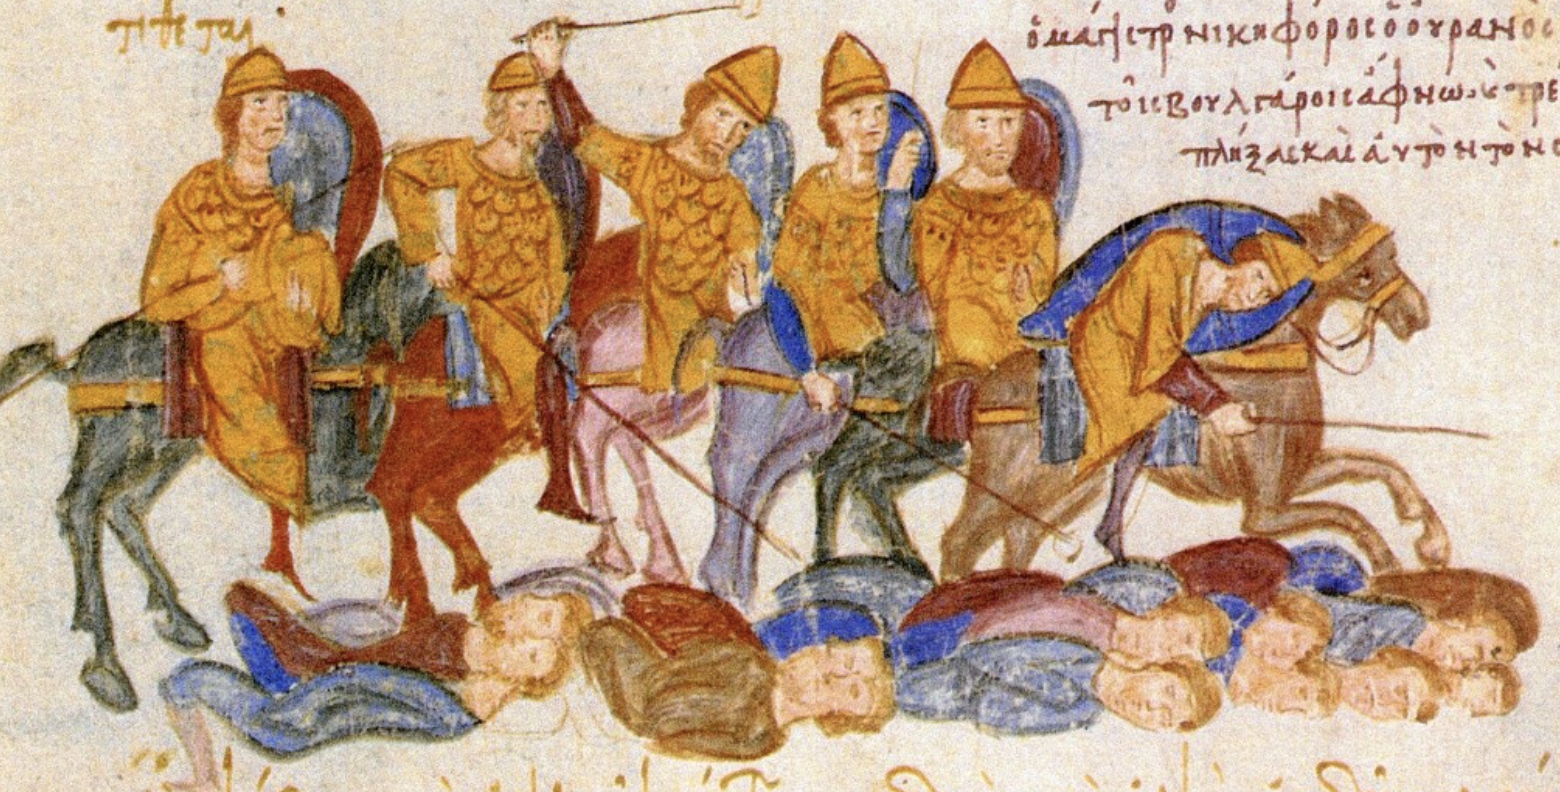 Emperor Basil II, the Porphyrogenitus (born in the purple), the Young, Boulgaroktonos (The Bulgar Slayer.) It is said that after defeating a Bulgarian army, he took the survivors and blinded 99 out of every 100 of them, leaving the 100th with one eye so that he could see well enough to lead his comrades back to their ruler.